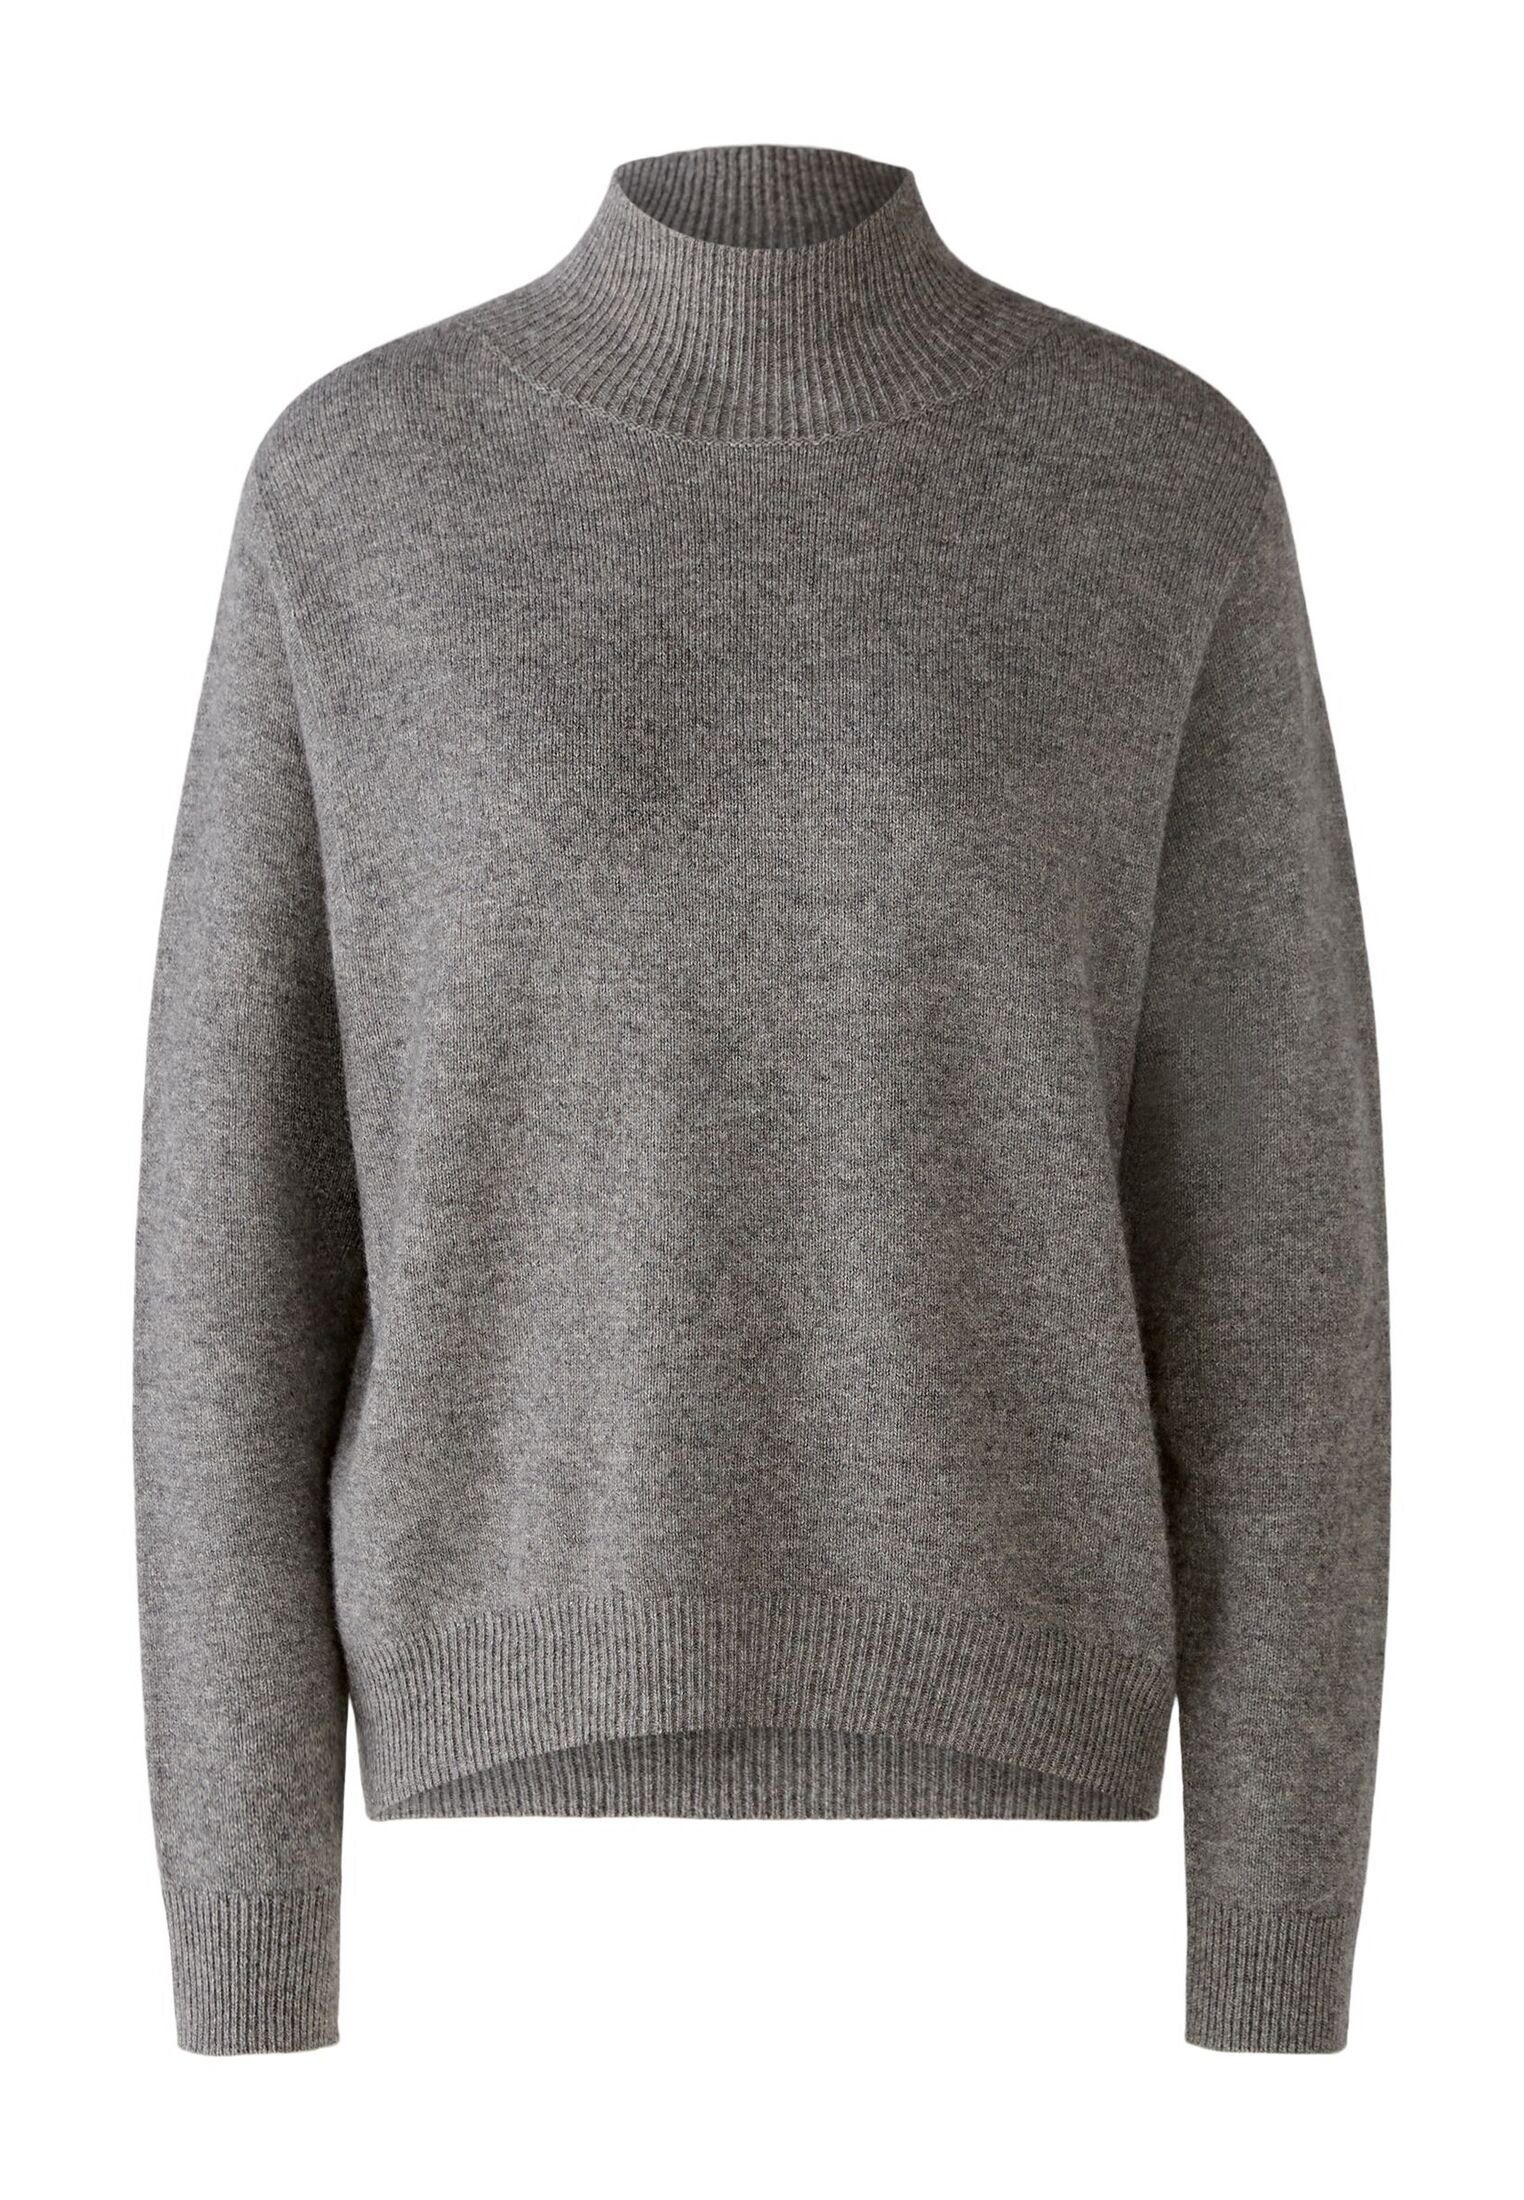 Oui Wollmischung Pullover grey Strickpullover